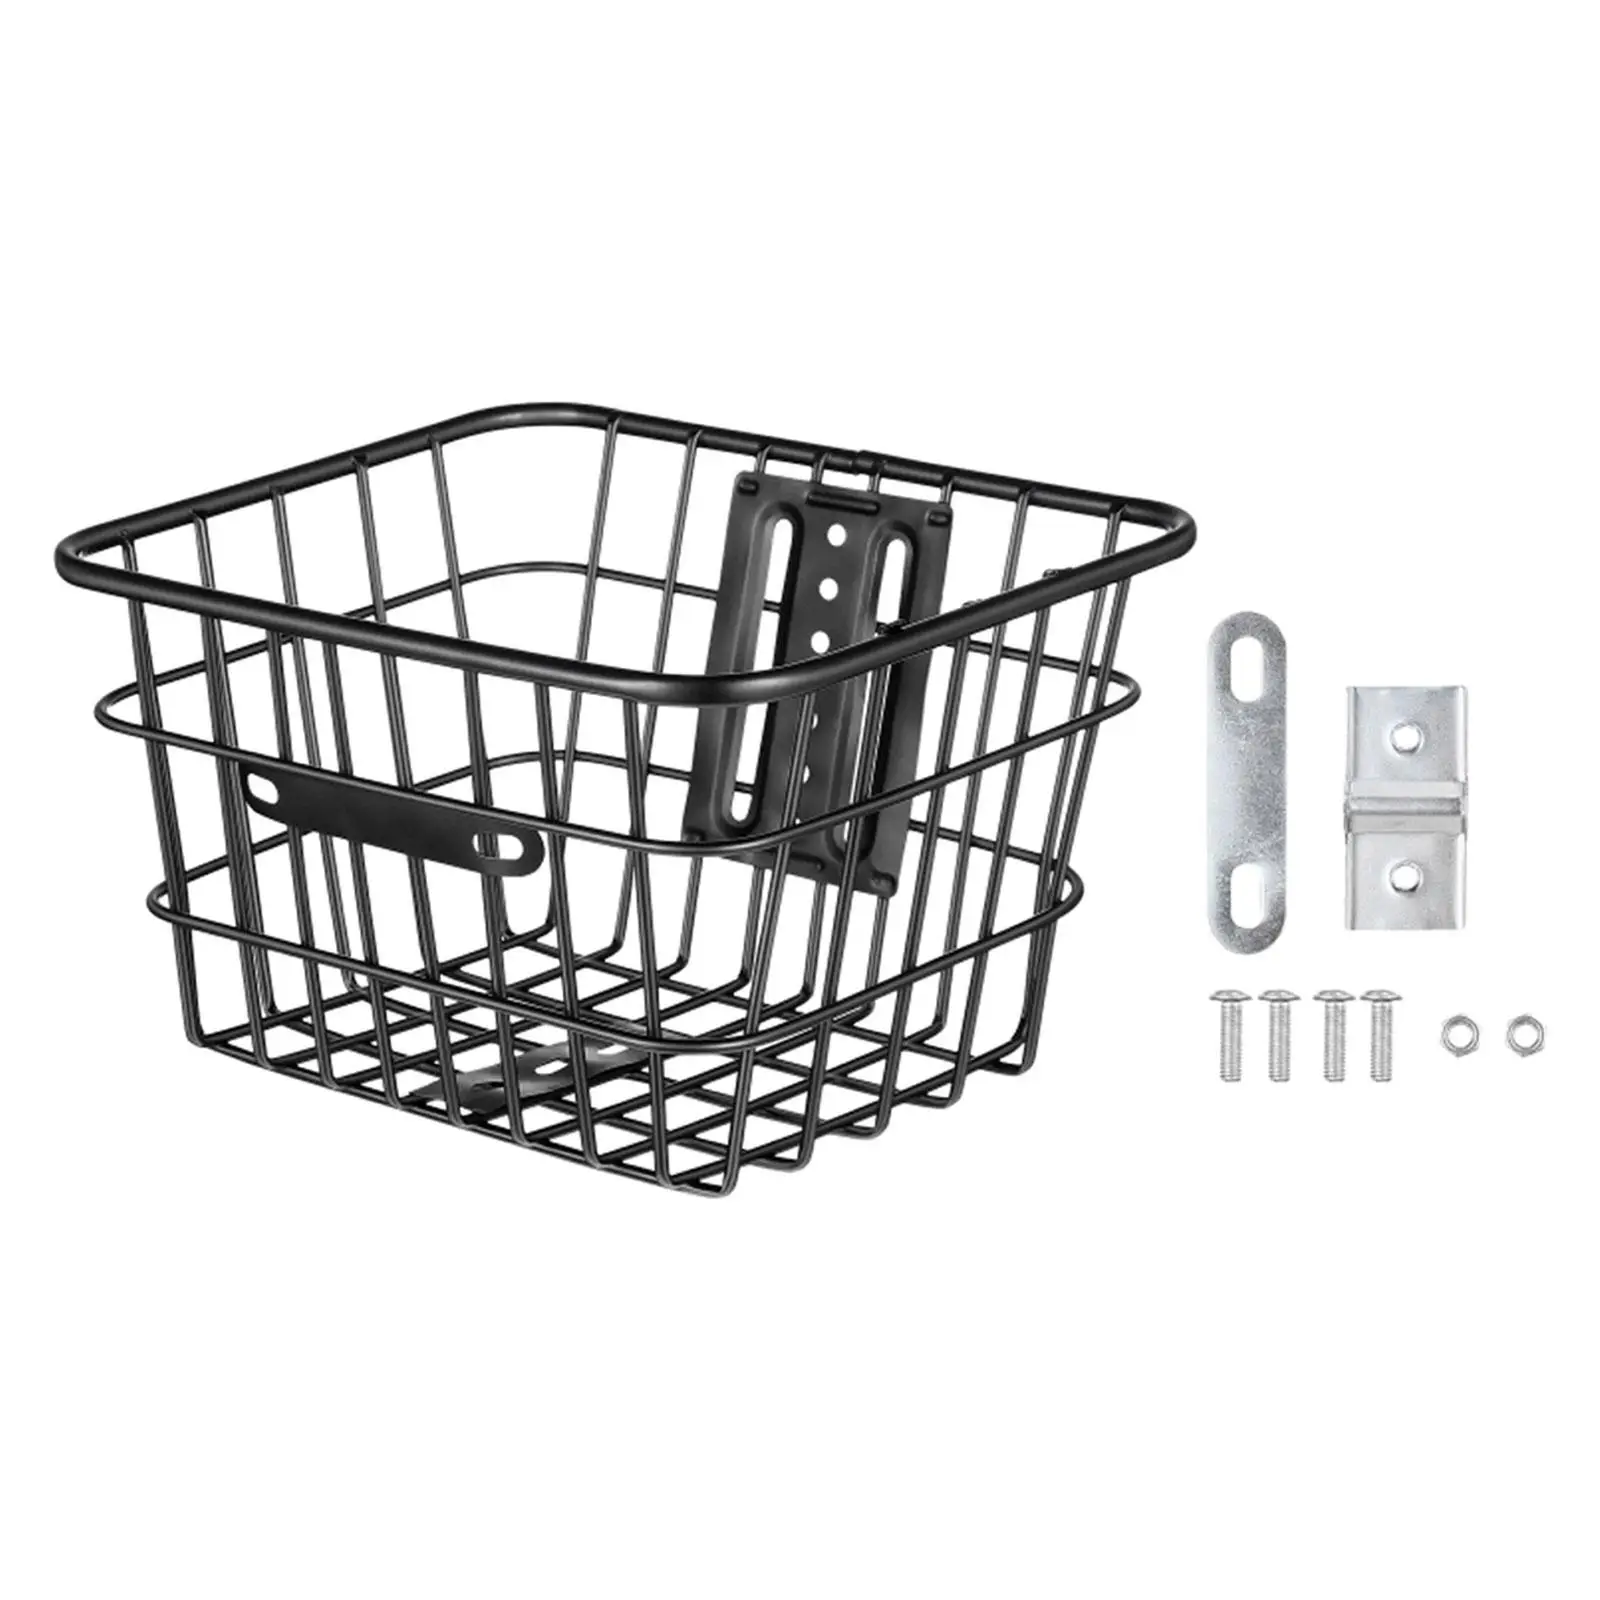 Bike Metal Mesh Front or Rear Basket without Lid Cargo Container Easily Install Sturdy Universal Accessory for Mountain Bikes